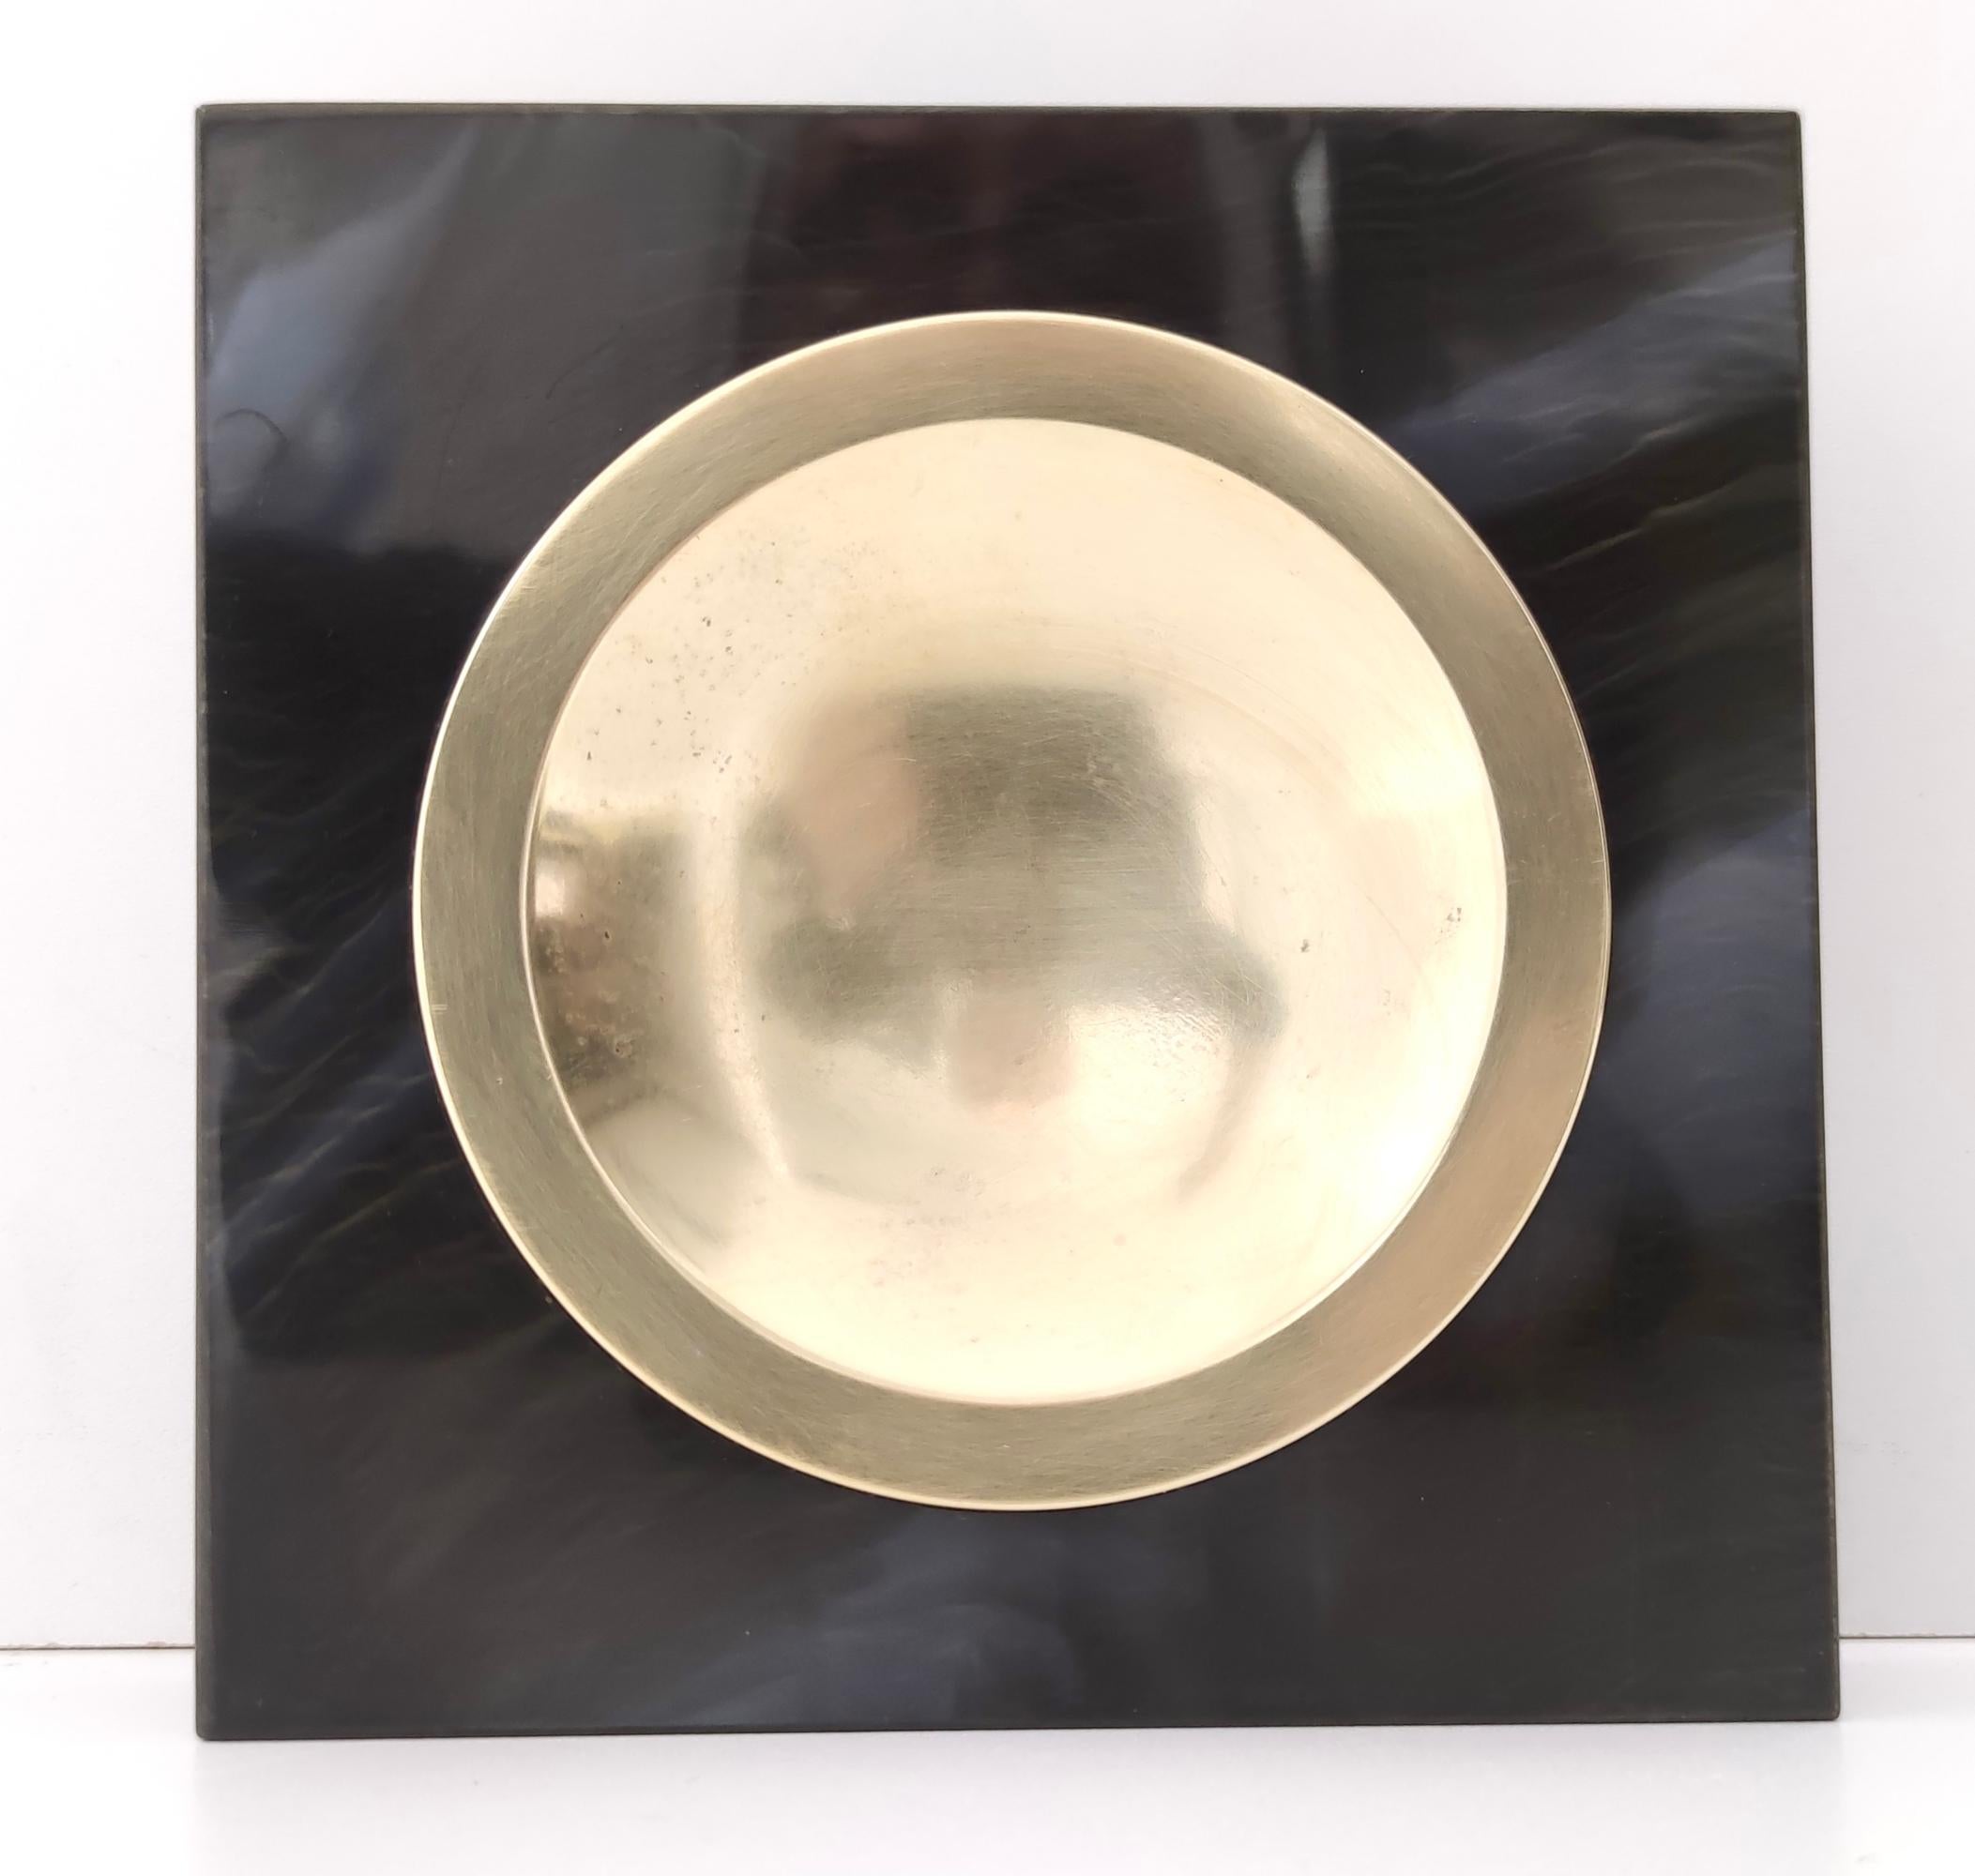 Made in Italy, 1970s.
This ashtray is made in brass and faux black marble.
It is vintage, therefore it might show slight traces of use, but it can be considered as in excellent original condition.

Measures: 
Width: 17cm
Depth: 17 cm 
Height: 4.2